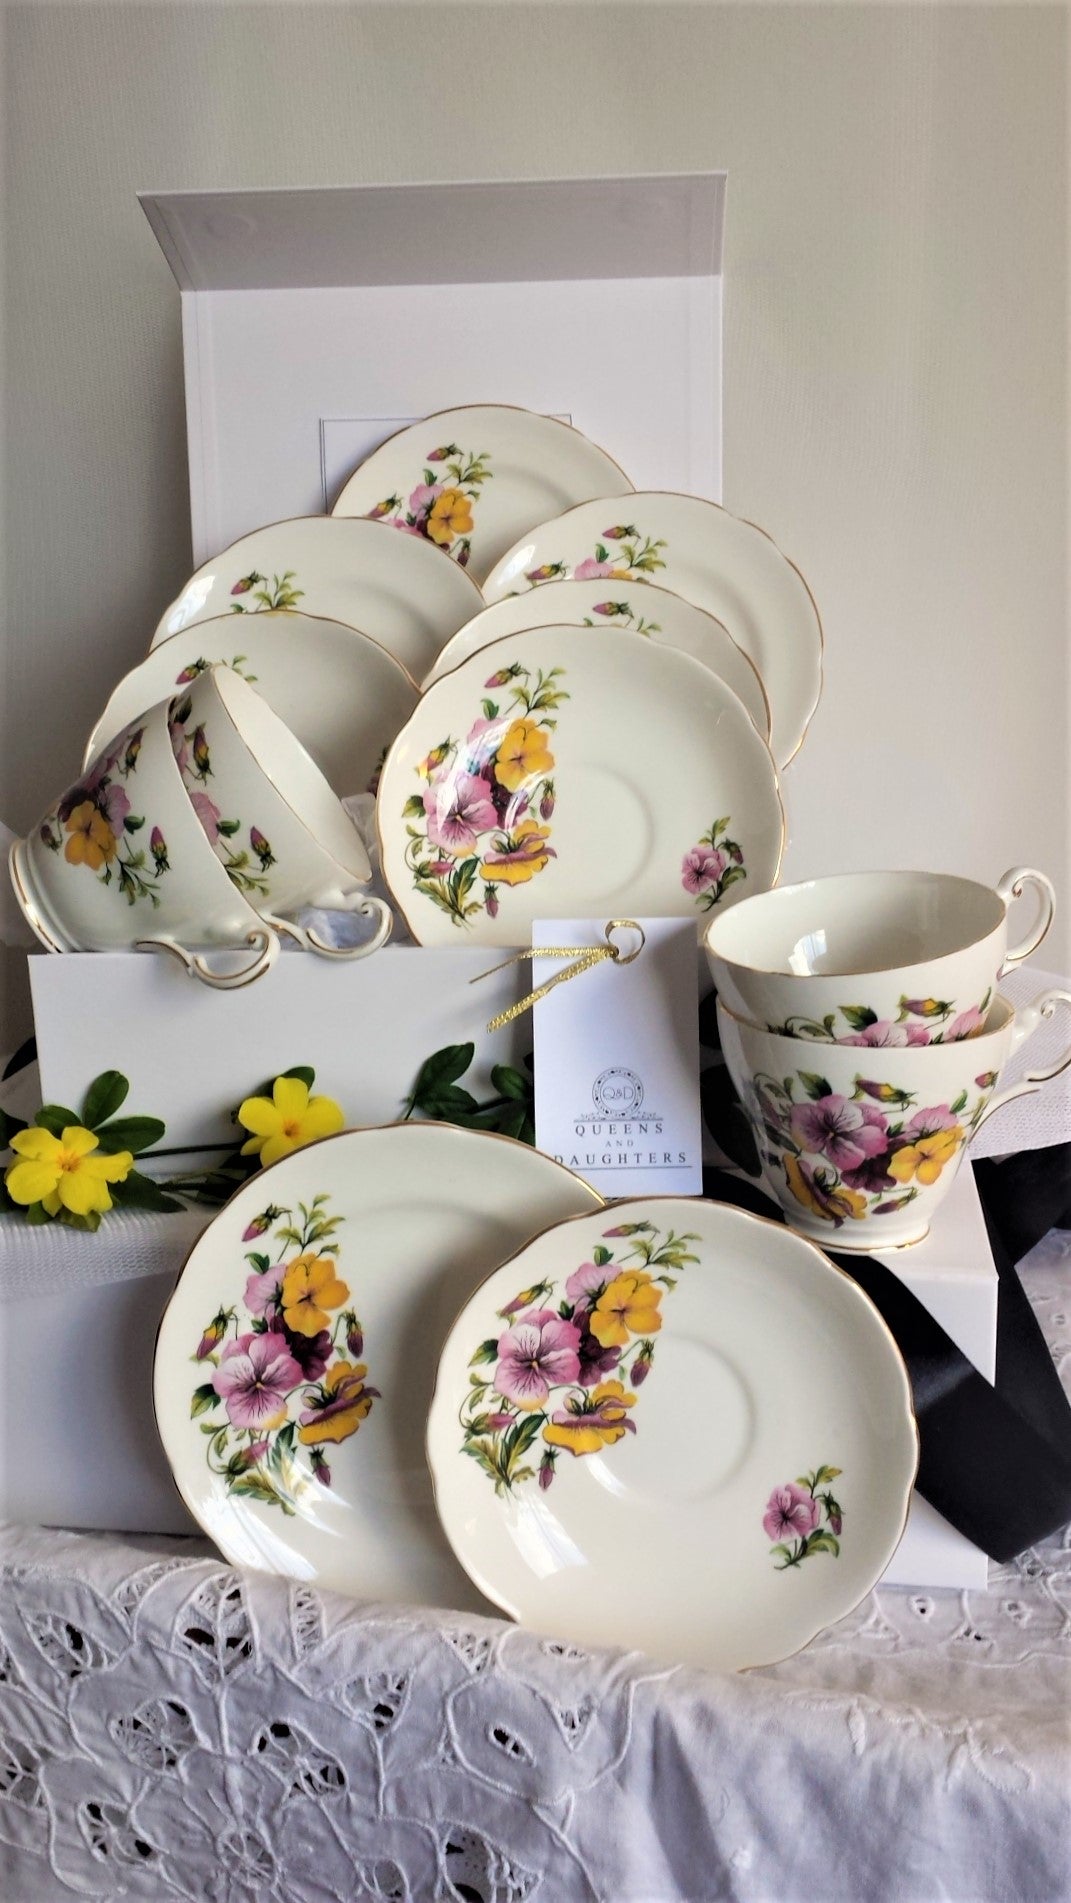 Regencey Cups, Saucers and Side Plates with assorted teaspoons & cake forks